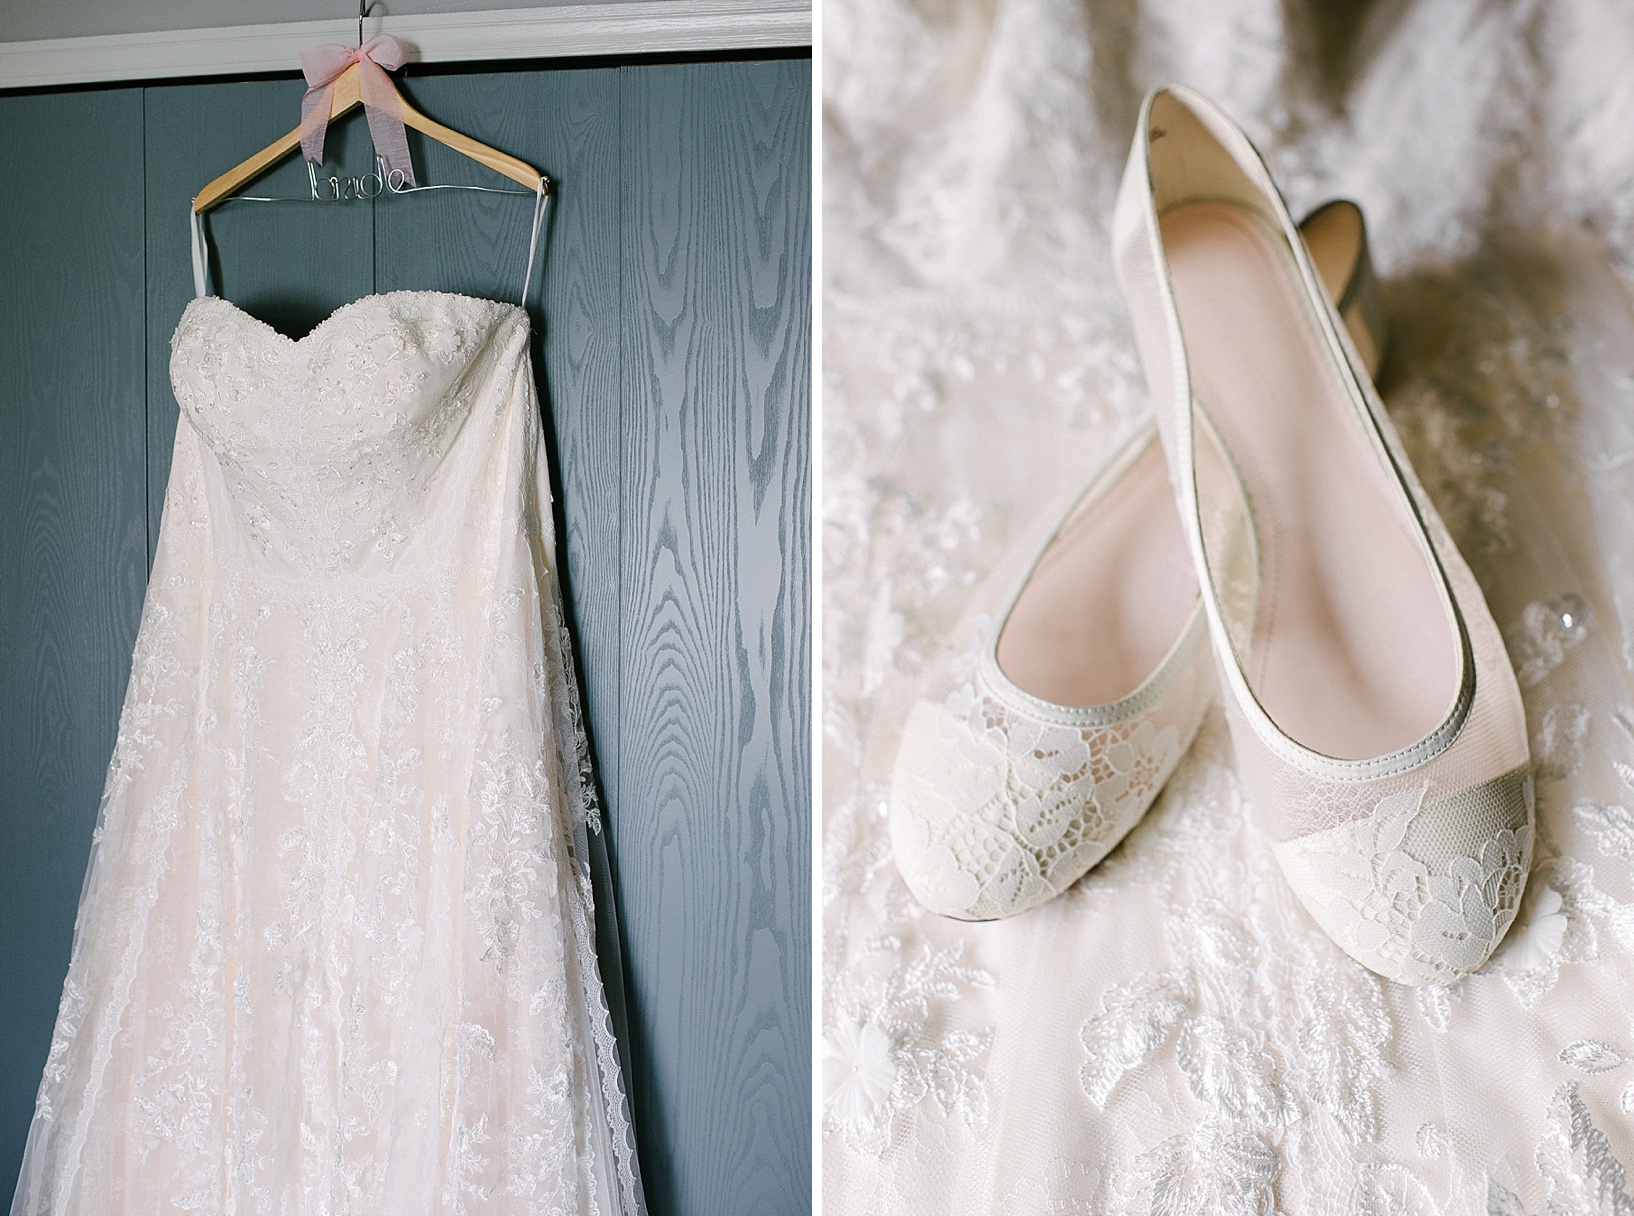 lace wedding dress and white ballet slippers